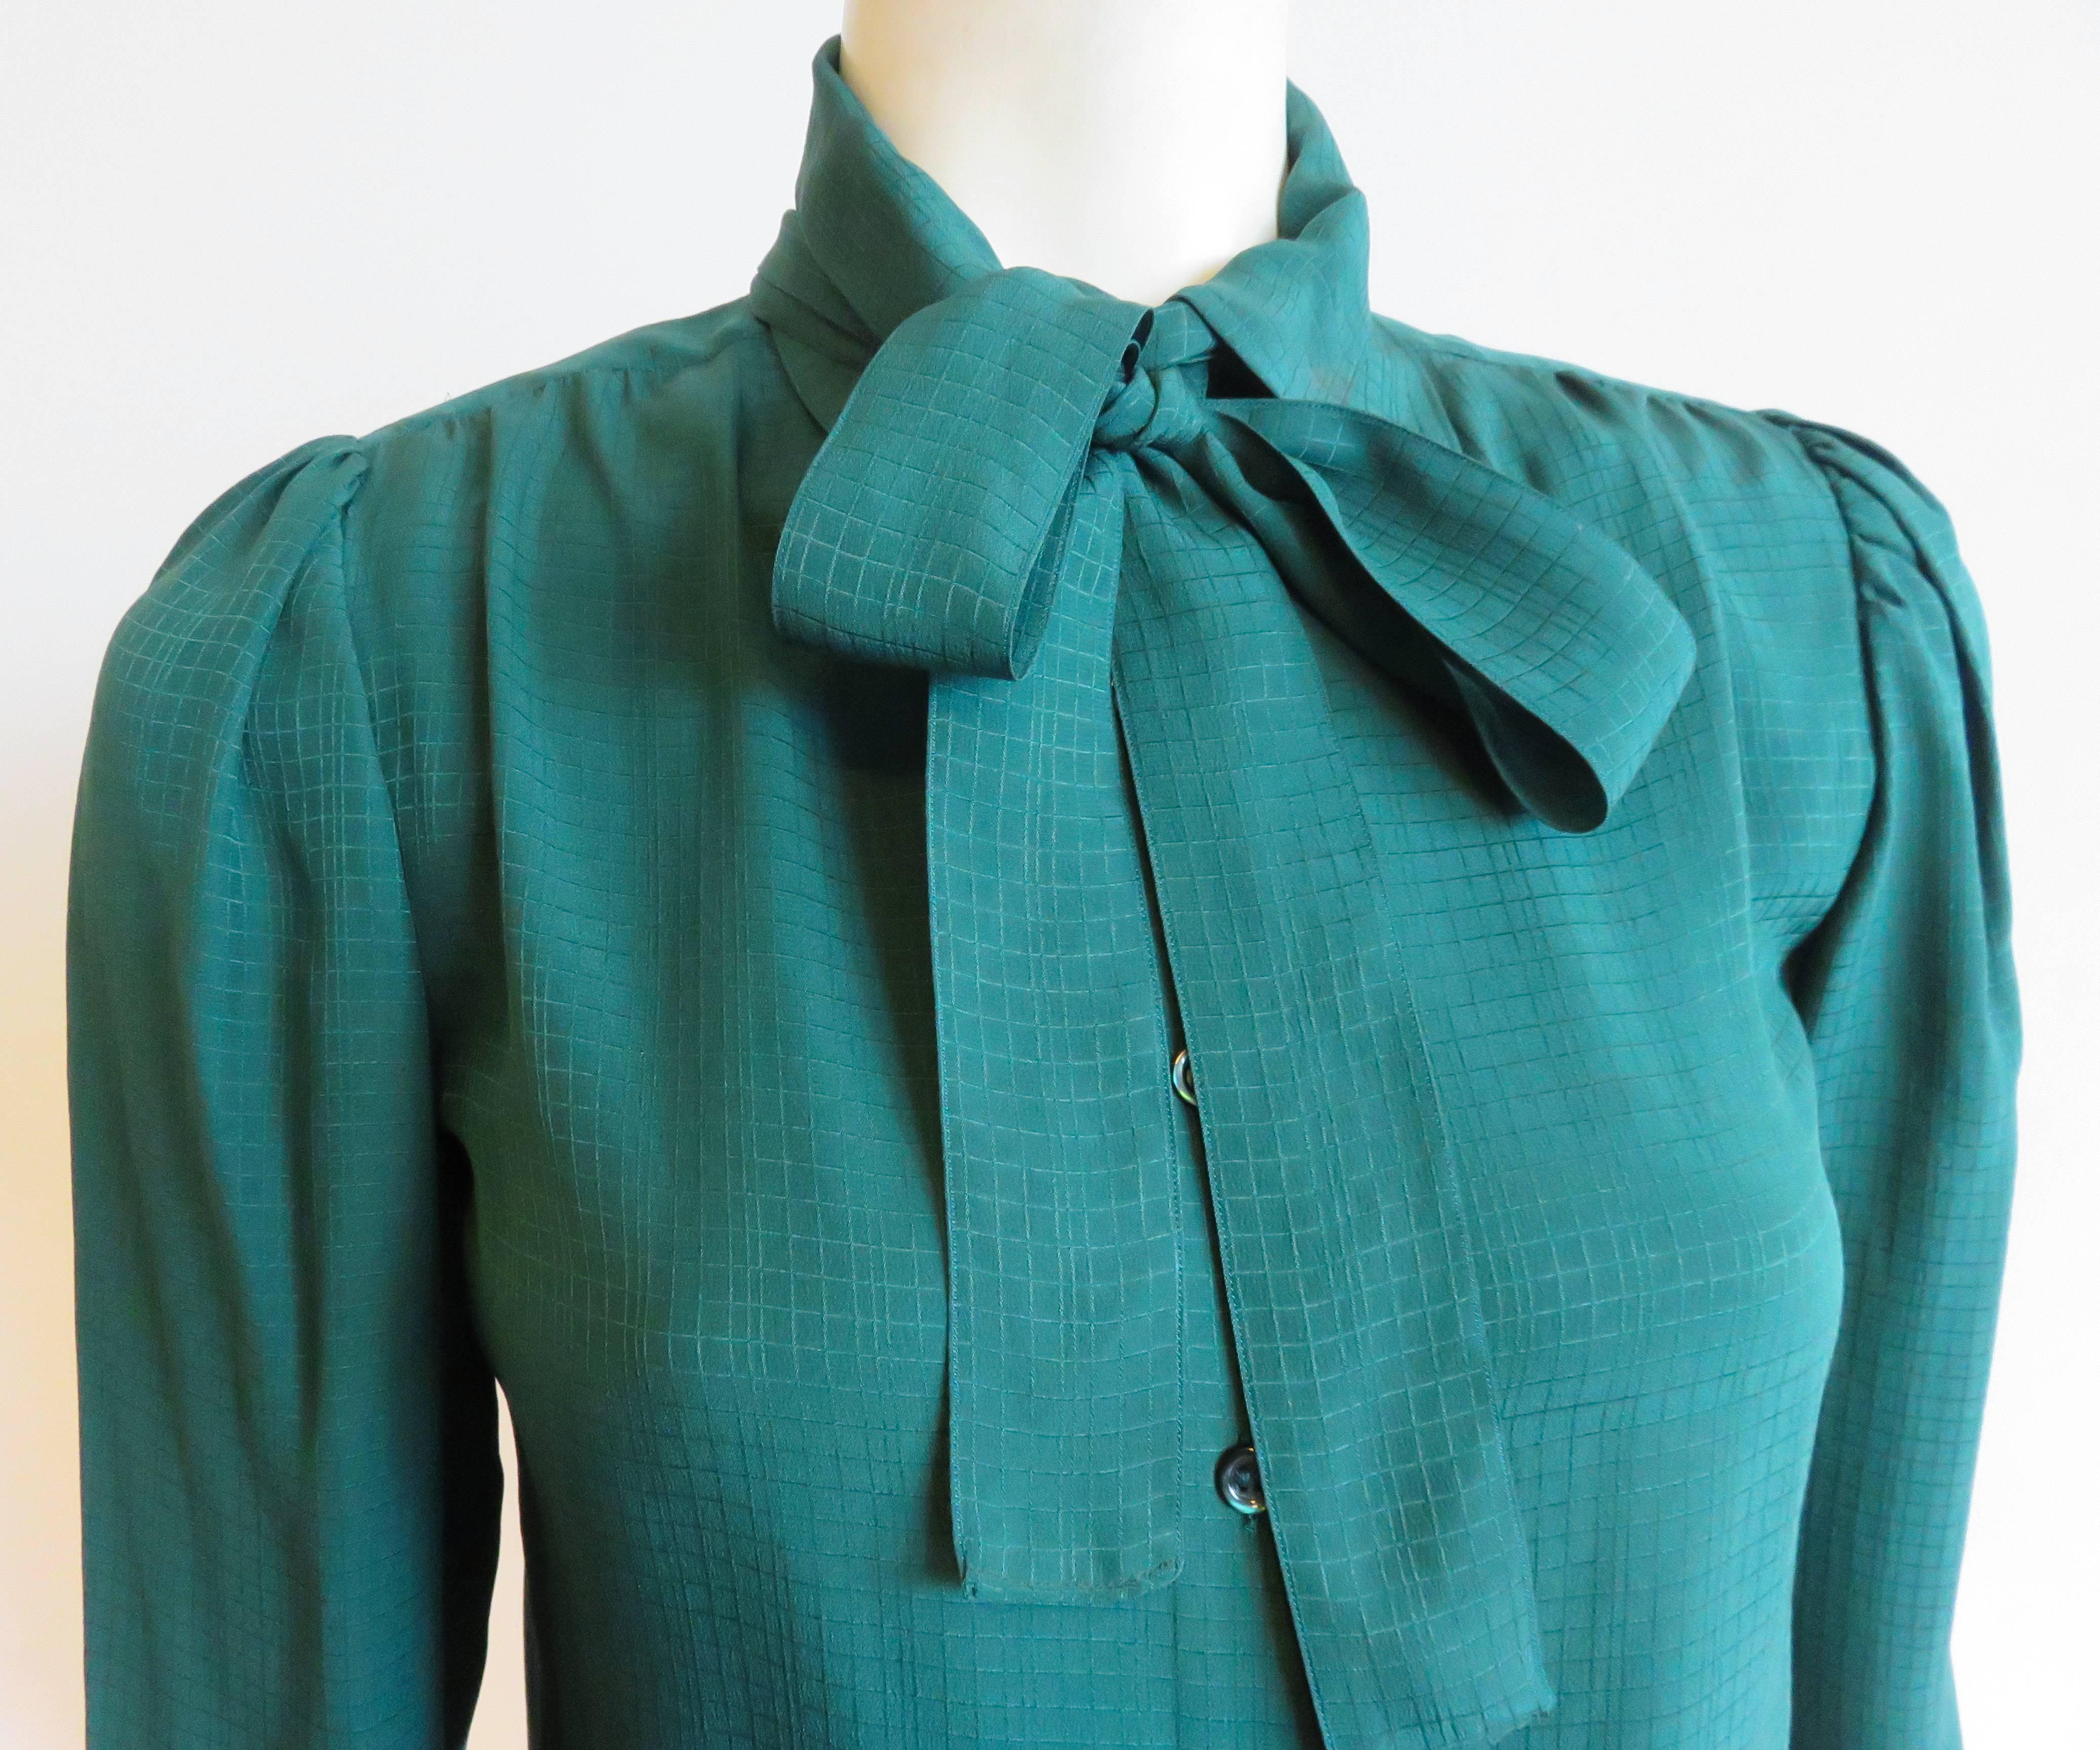 Excellent condition, 1980's YVES SAINT LAURENT forest green, silk check jacquard blouse with neck-tie detail.

Double collar detail with neck-tie layered between the two collars.

Button down front placket and cuffs.

*MEASUREMENTS*

FR